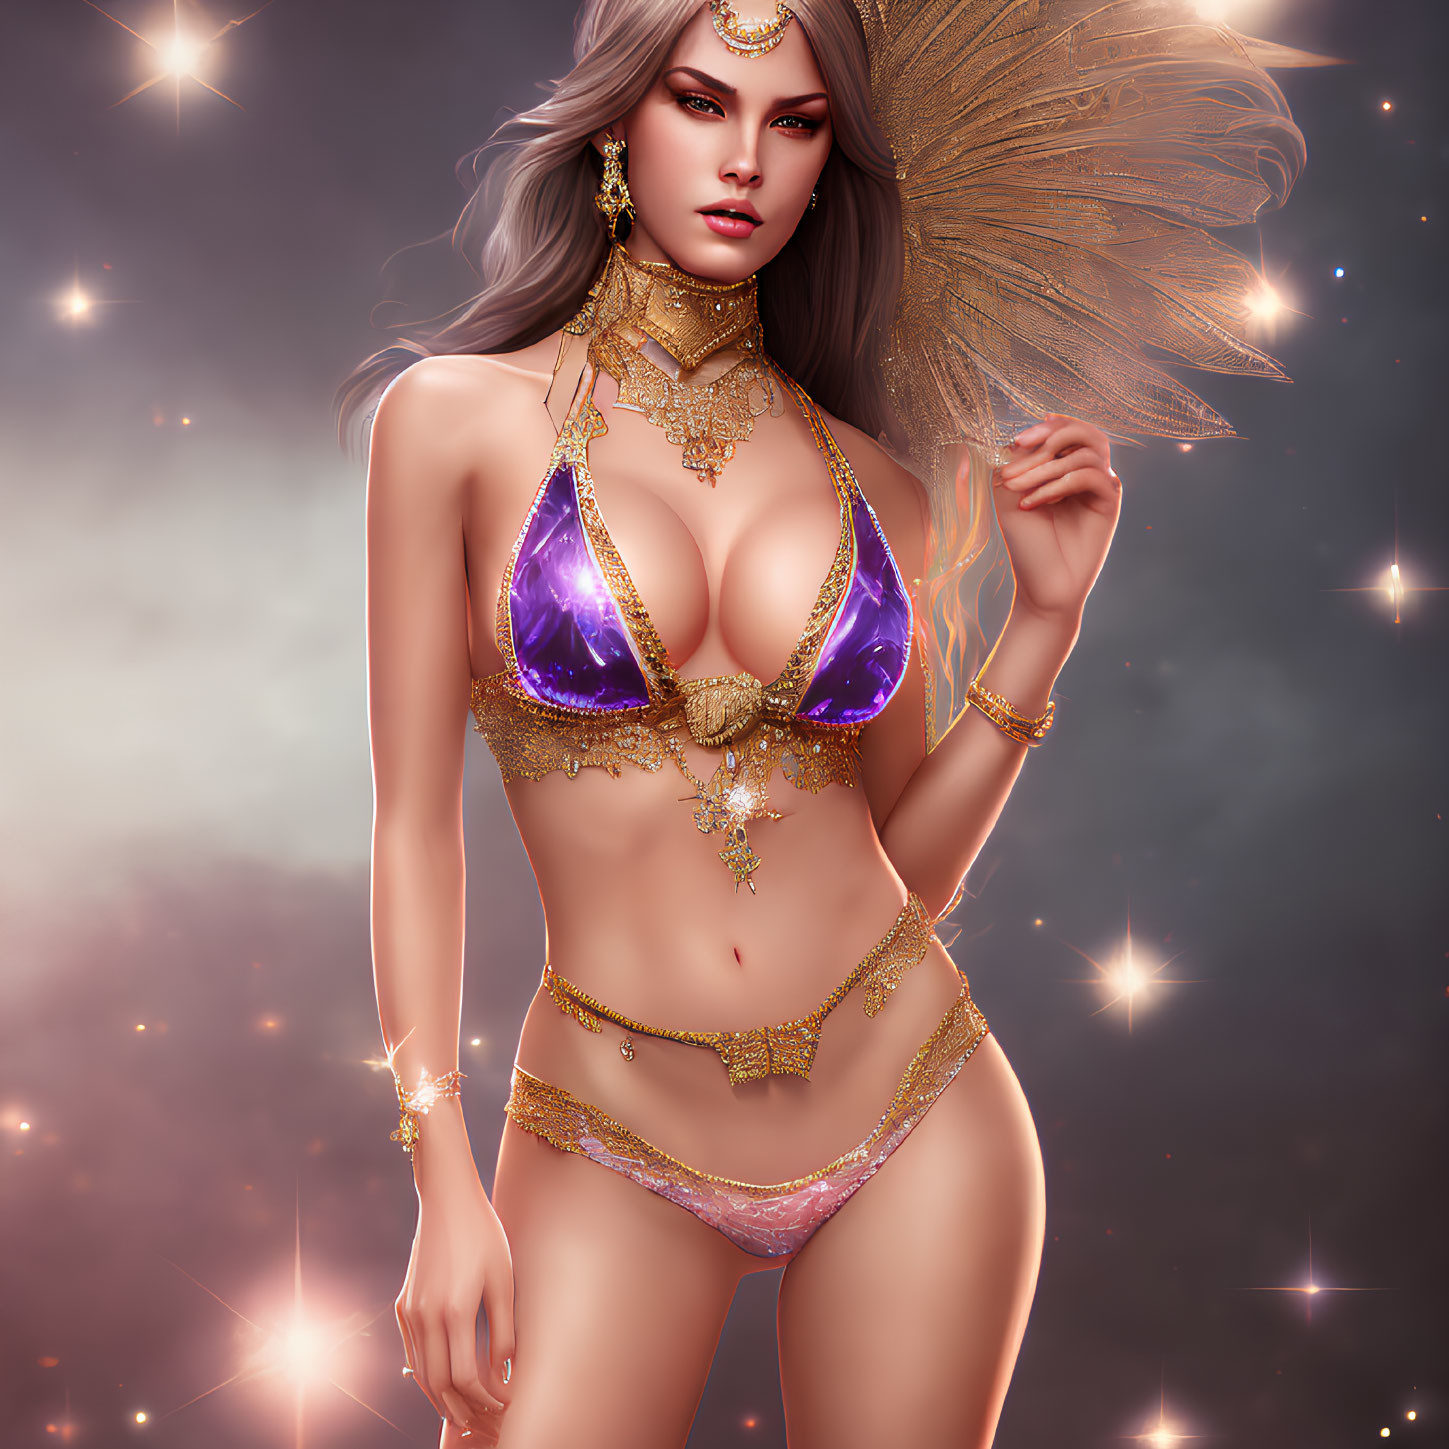 Fantastical illustration of woman with silver hair in purple and gold bikini against mystical starry backdrop